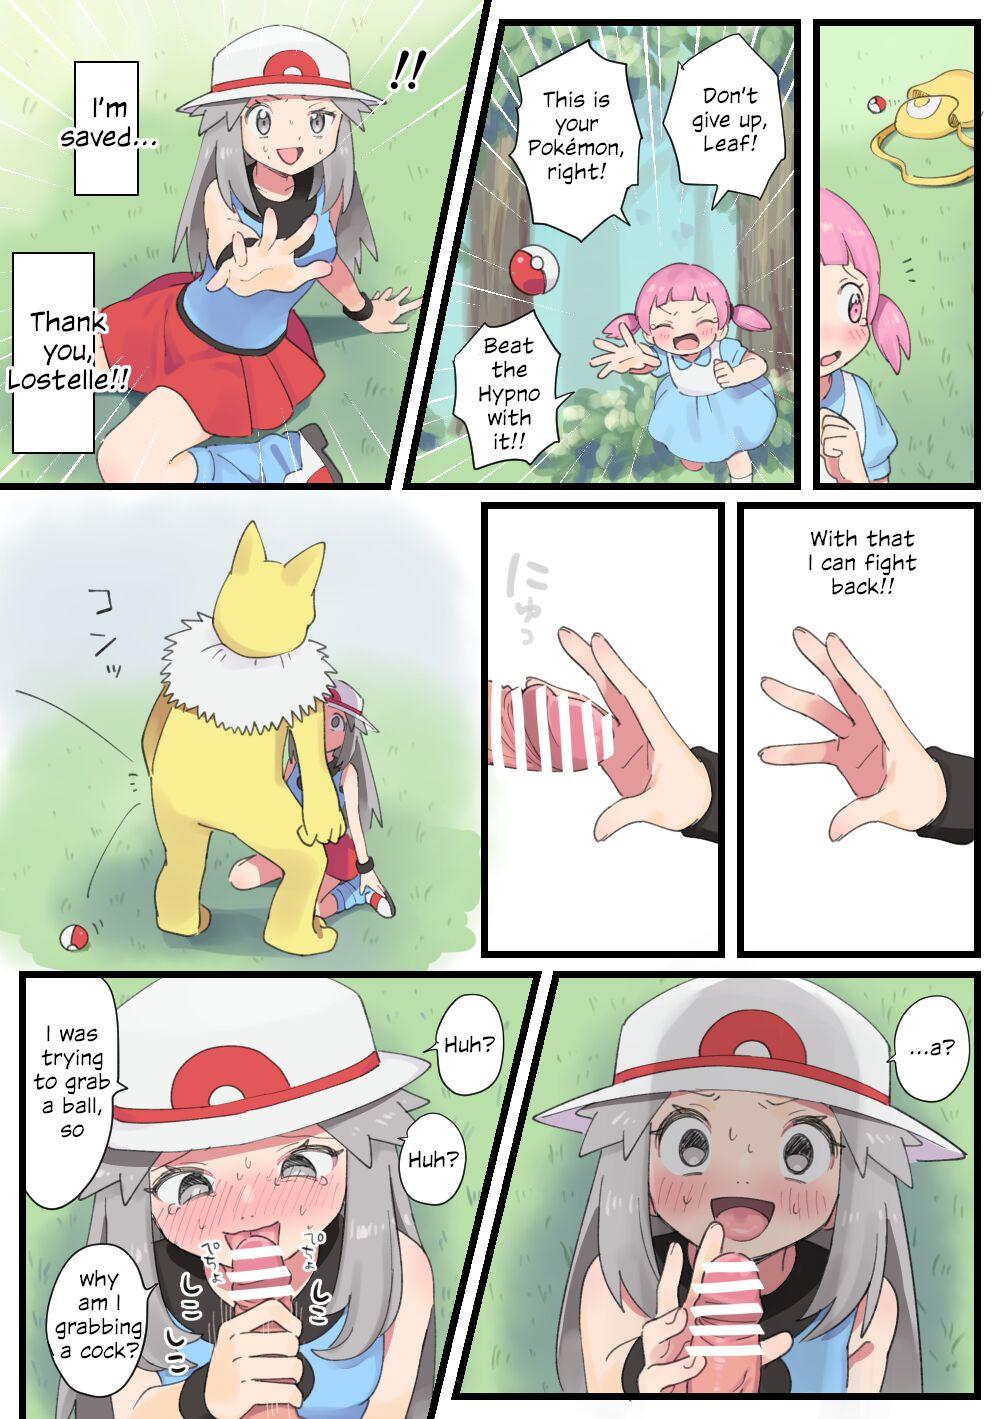 Hardcore Fucking Leaf goes to help Mayo-chan and gets hypnotically raped by Hypno - Pokemon | pocket monsters Japan - Picture 2